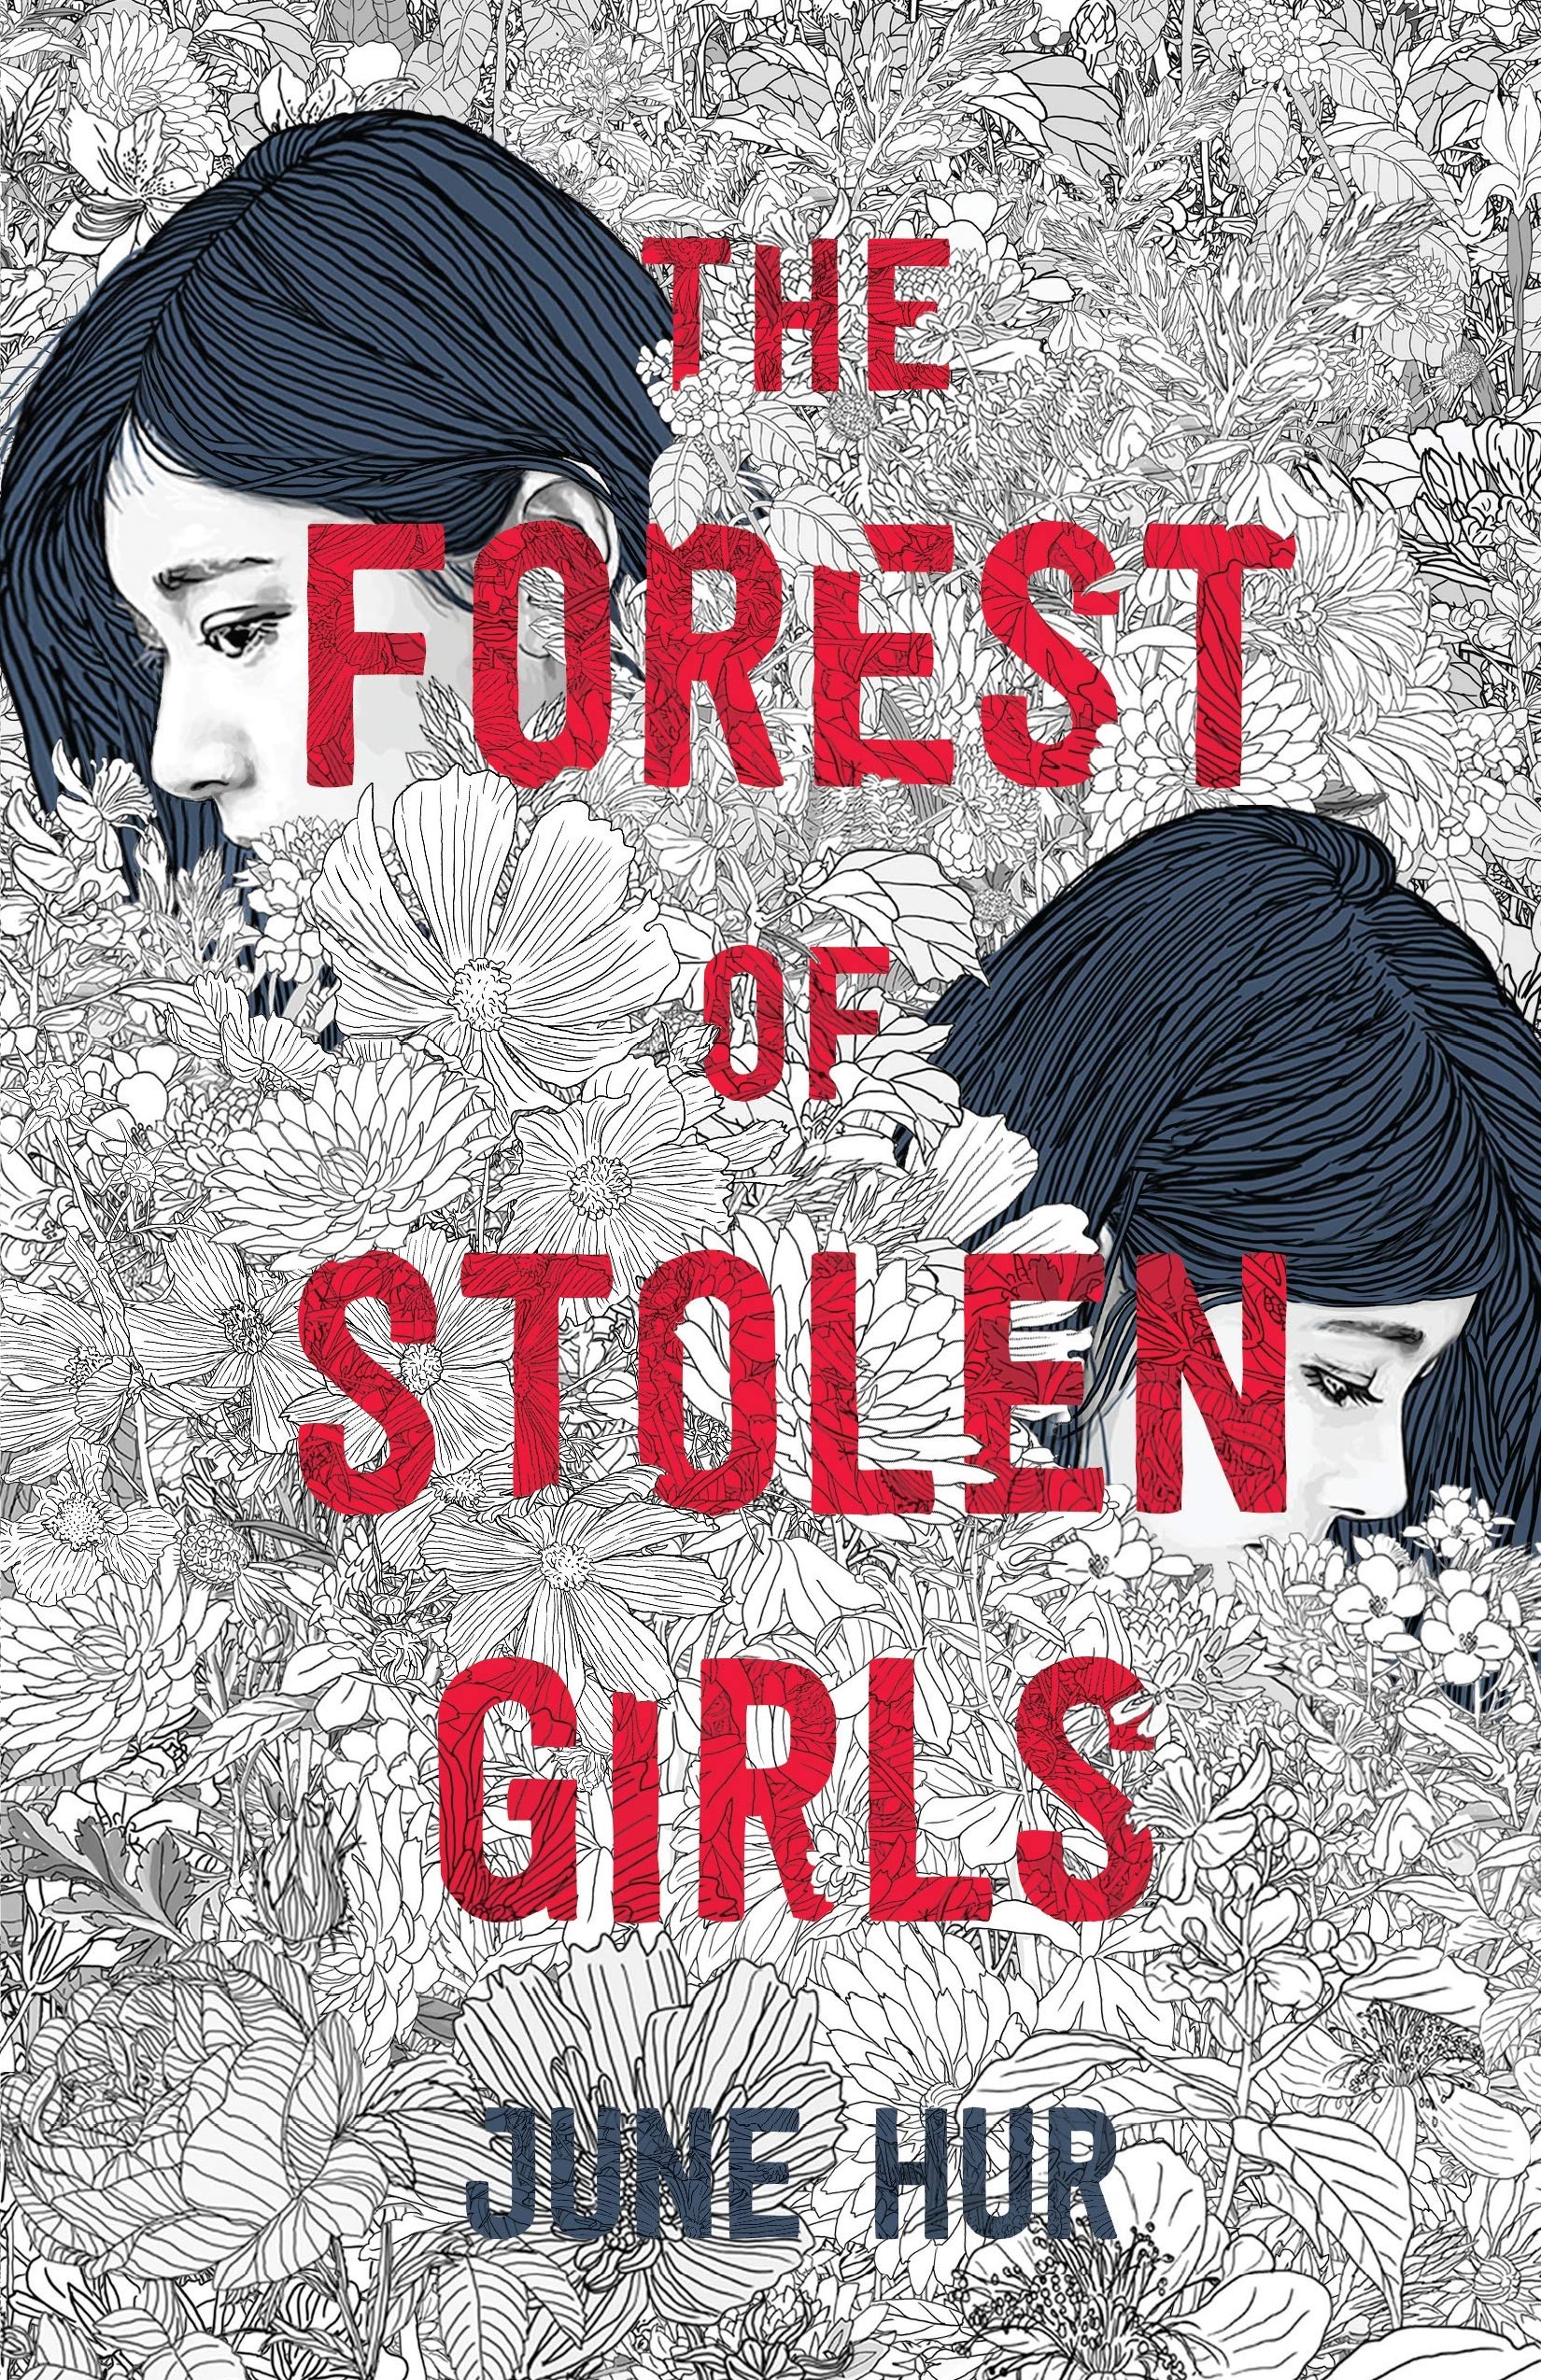 Cover image for "The Forest of Stolen Girls"